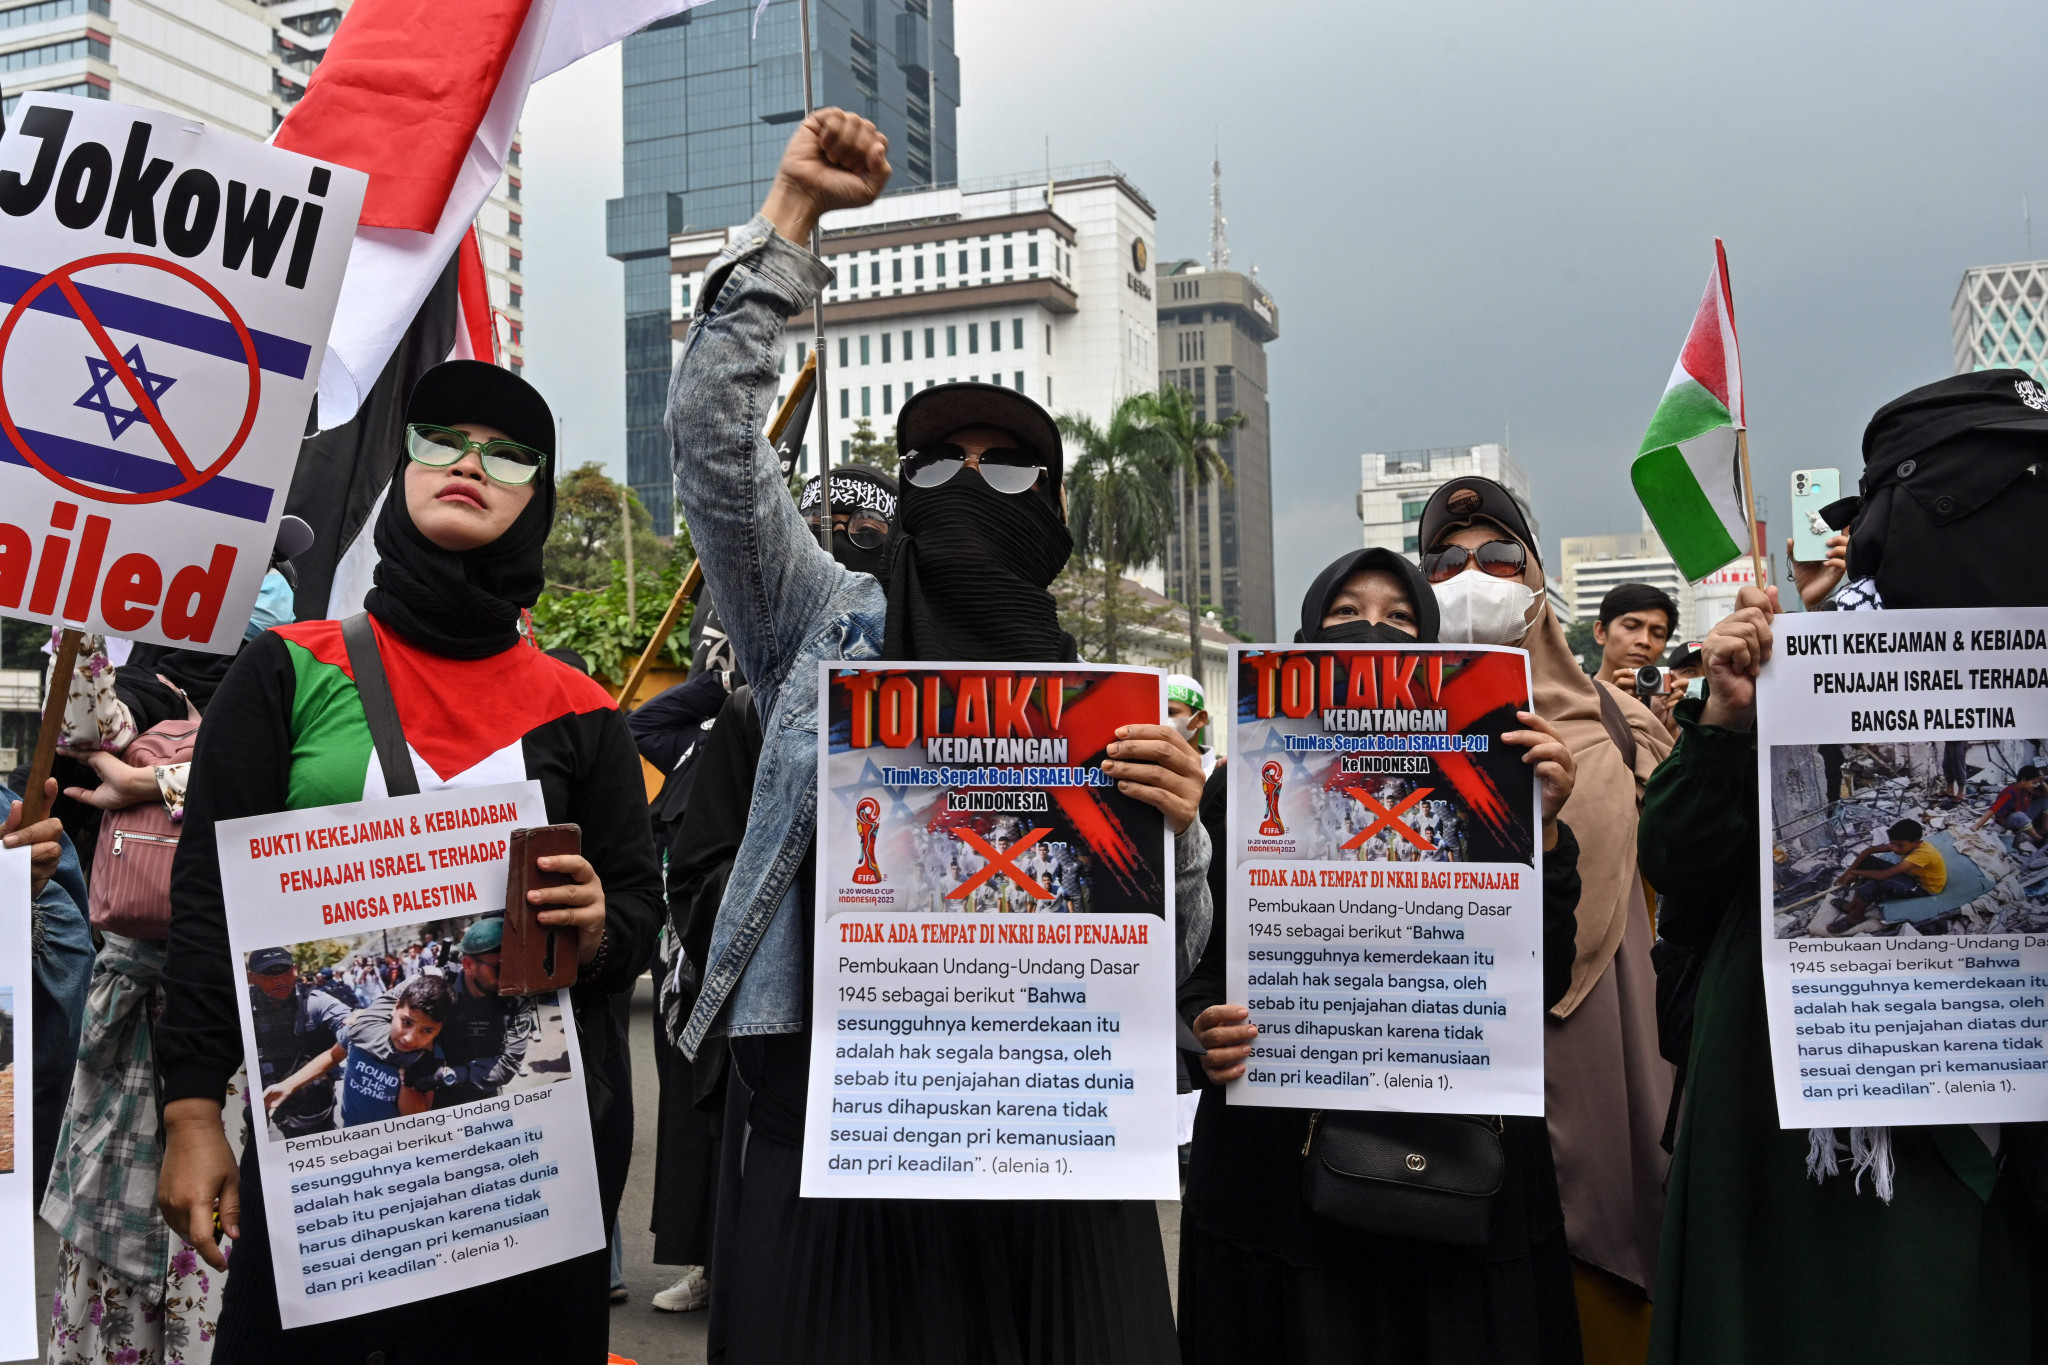 Protests against Israel's participation have already led to Indonesia being stripped of its rights to host the FIFA Under-20 World Cup ©Getty Images